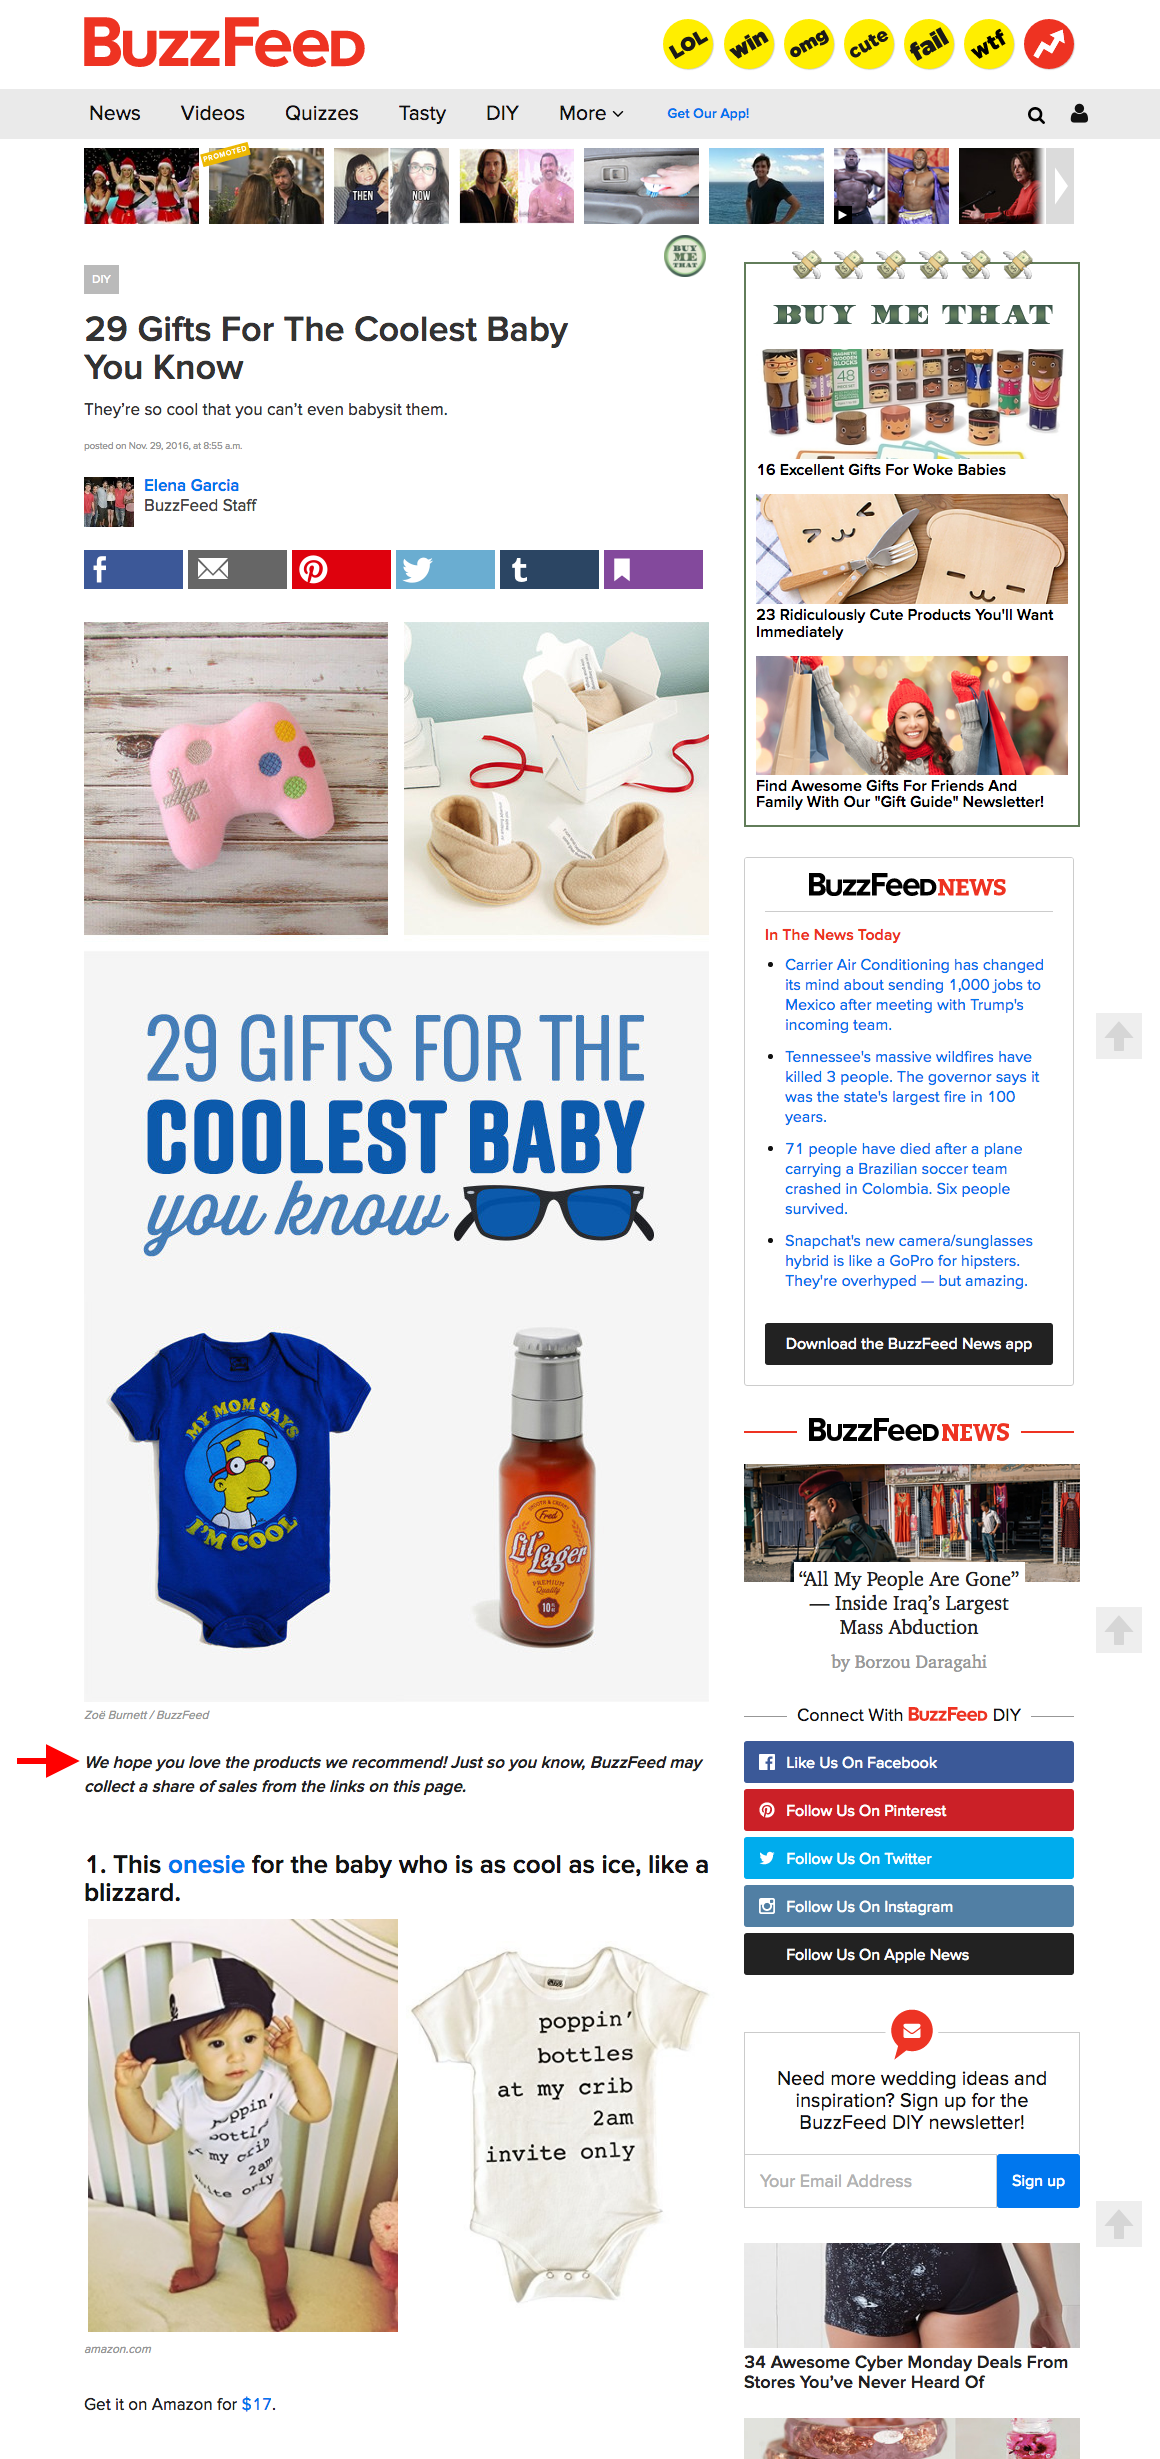 buzzfeed-buy-me-that-coolest-baby